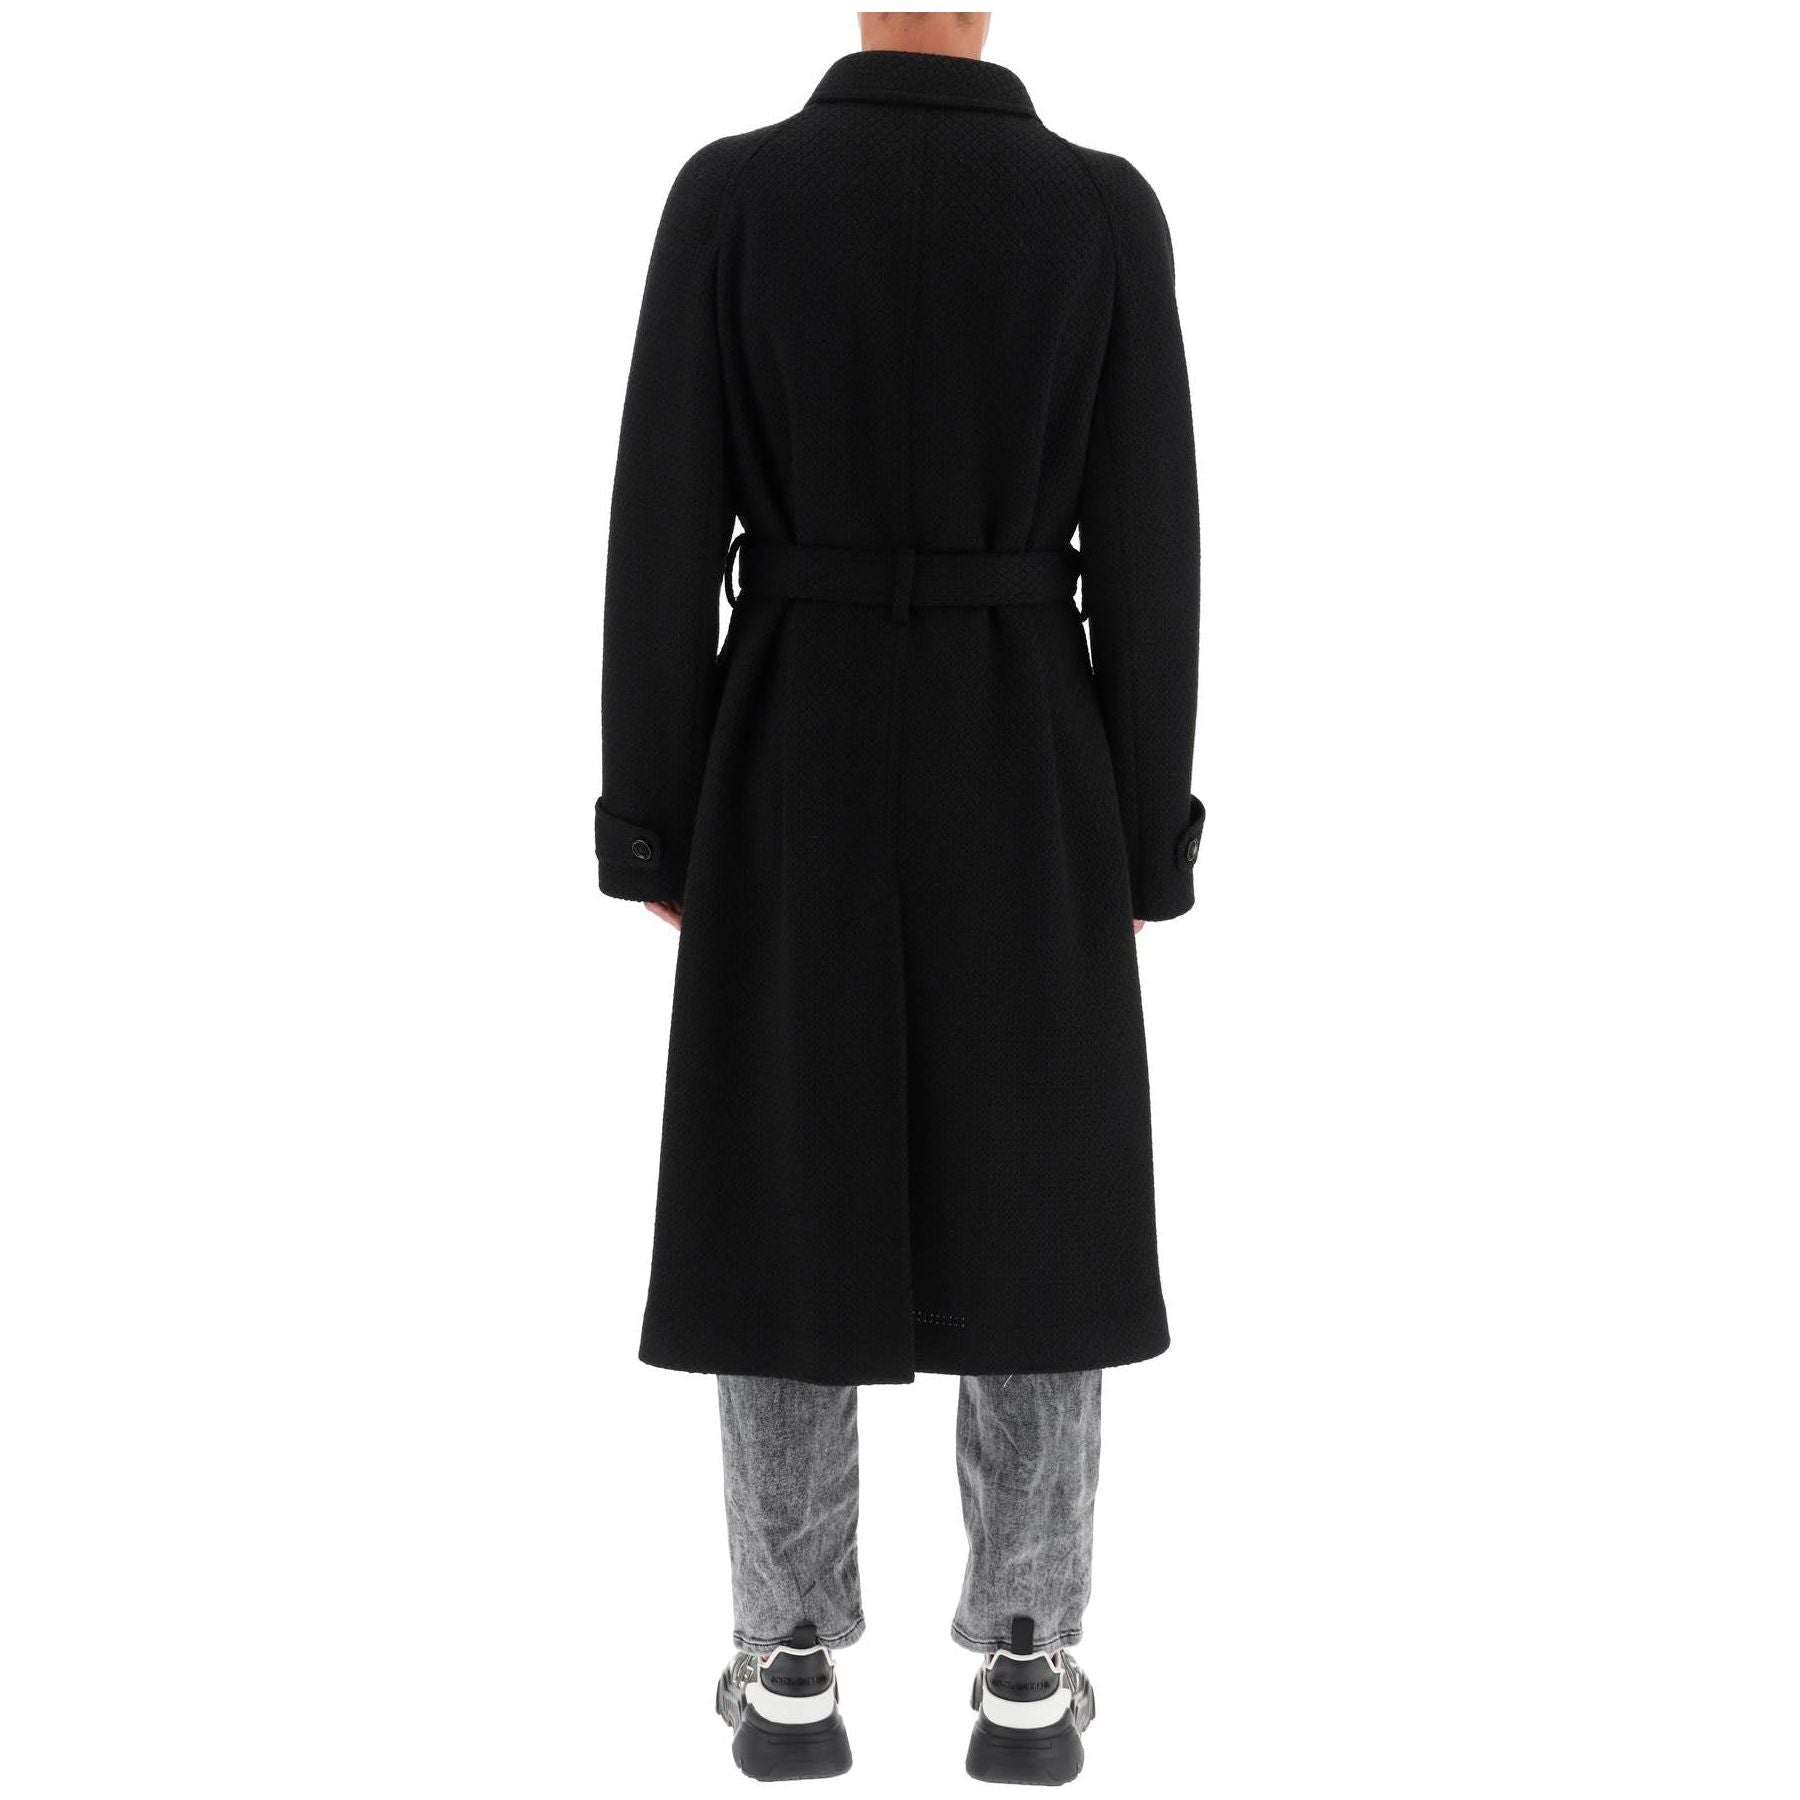 Tailored Wool Blend Knit Coat